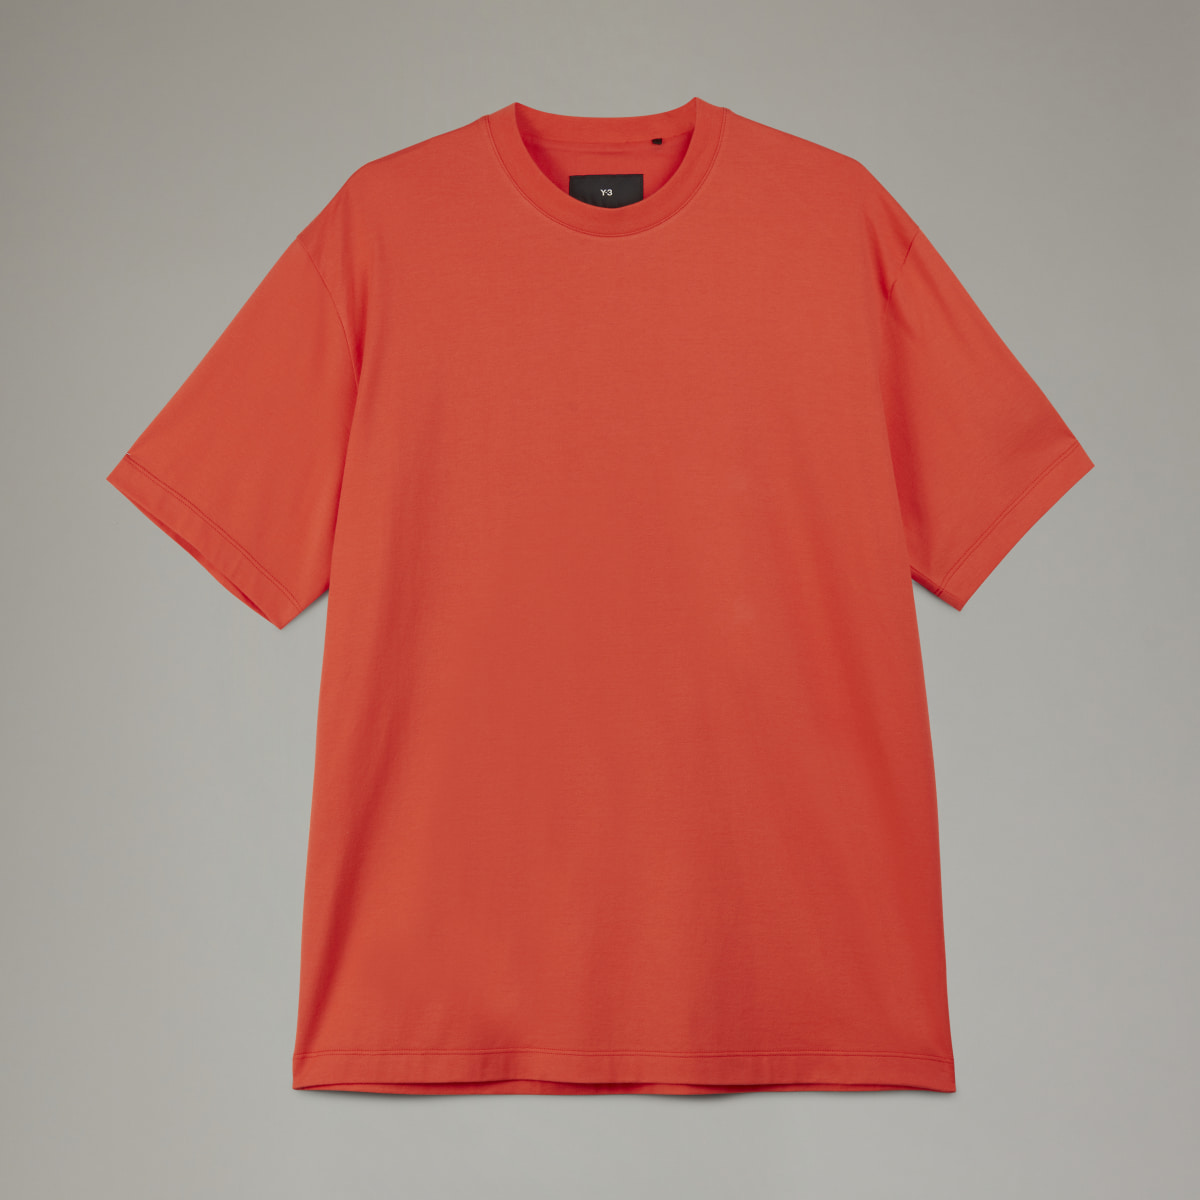 Adidas Y-3 Relaxed T-Shirt. 5